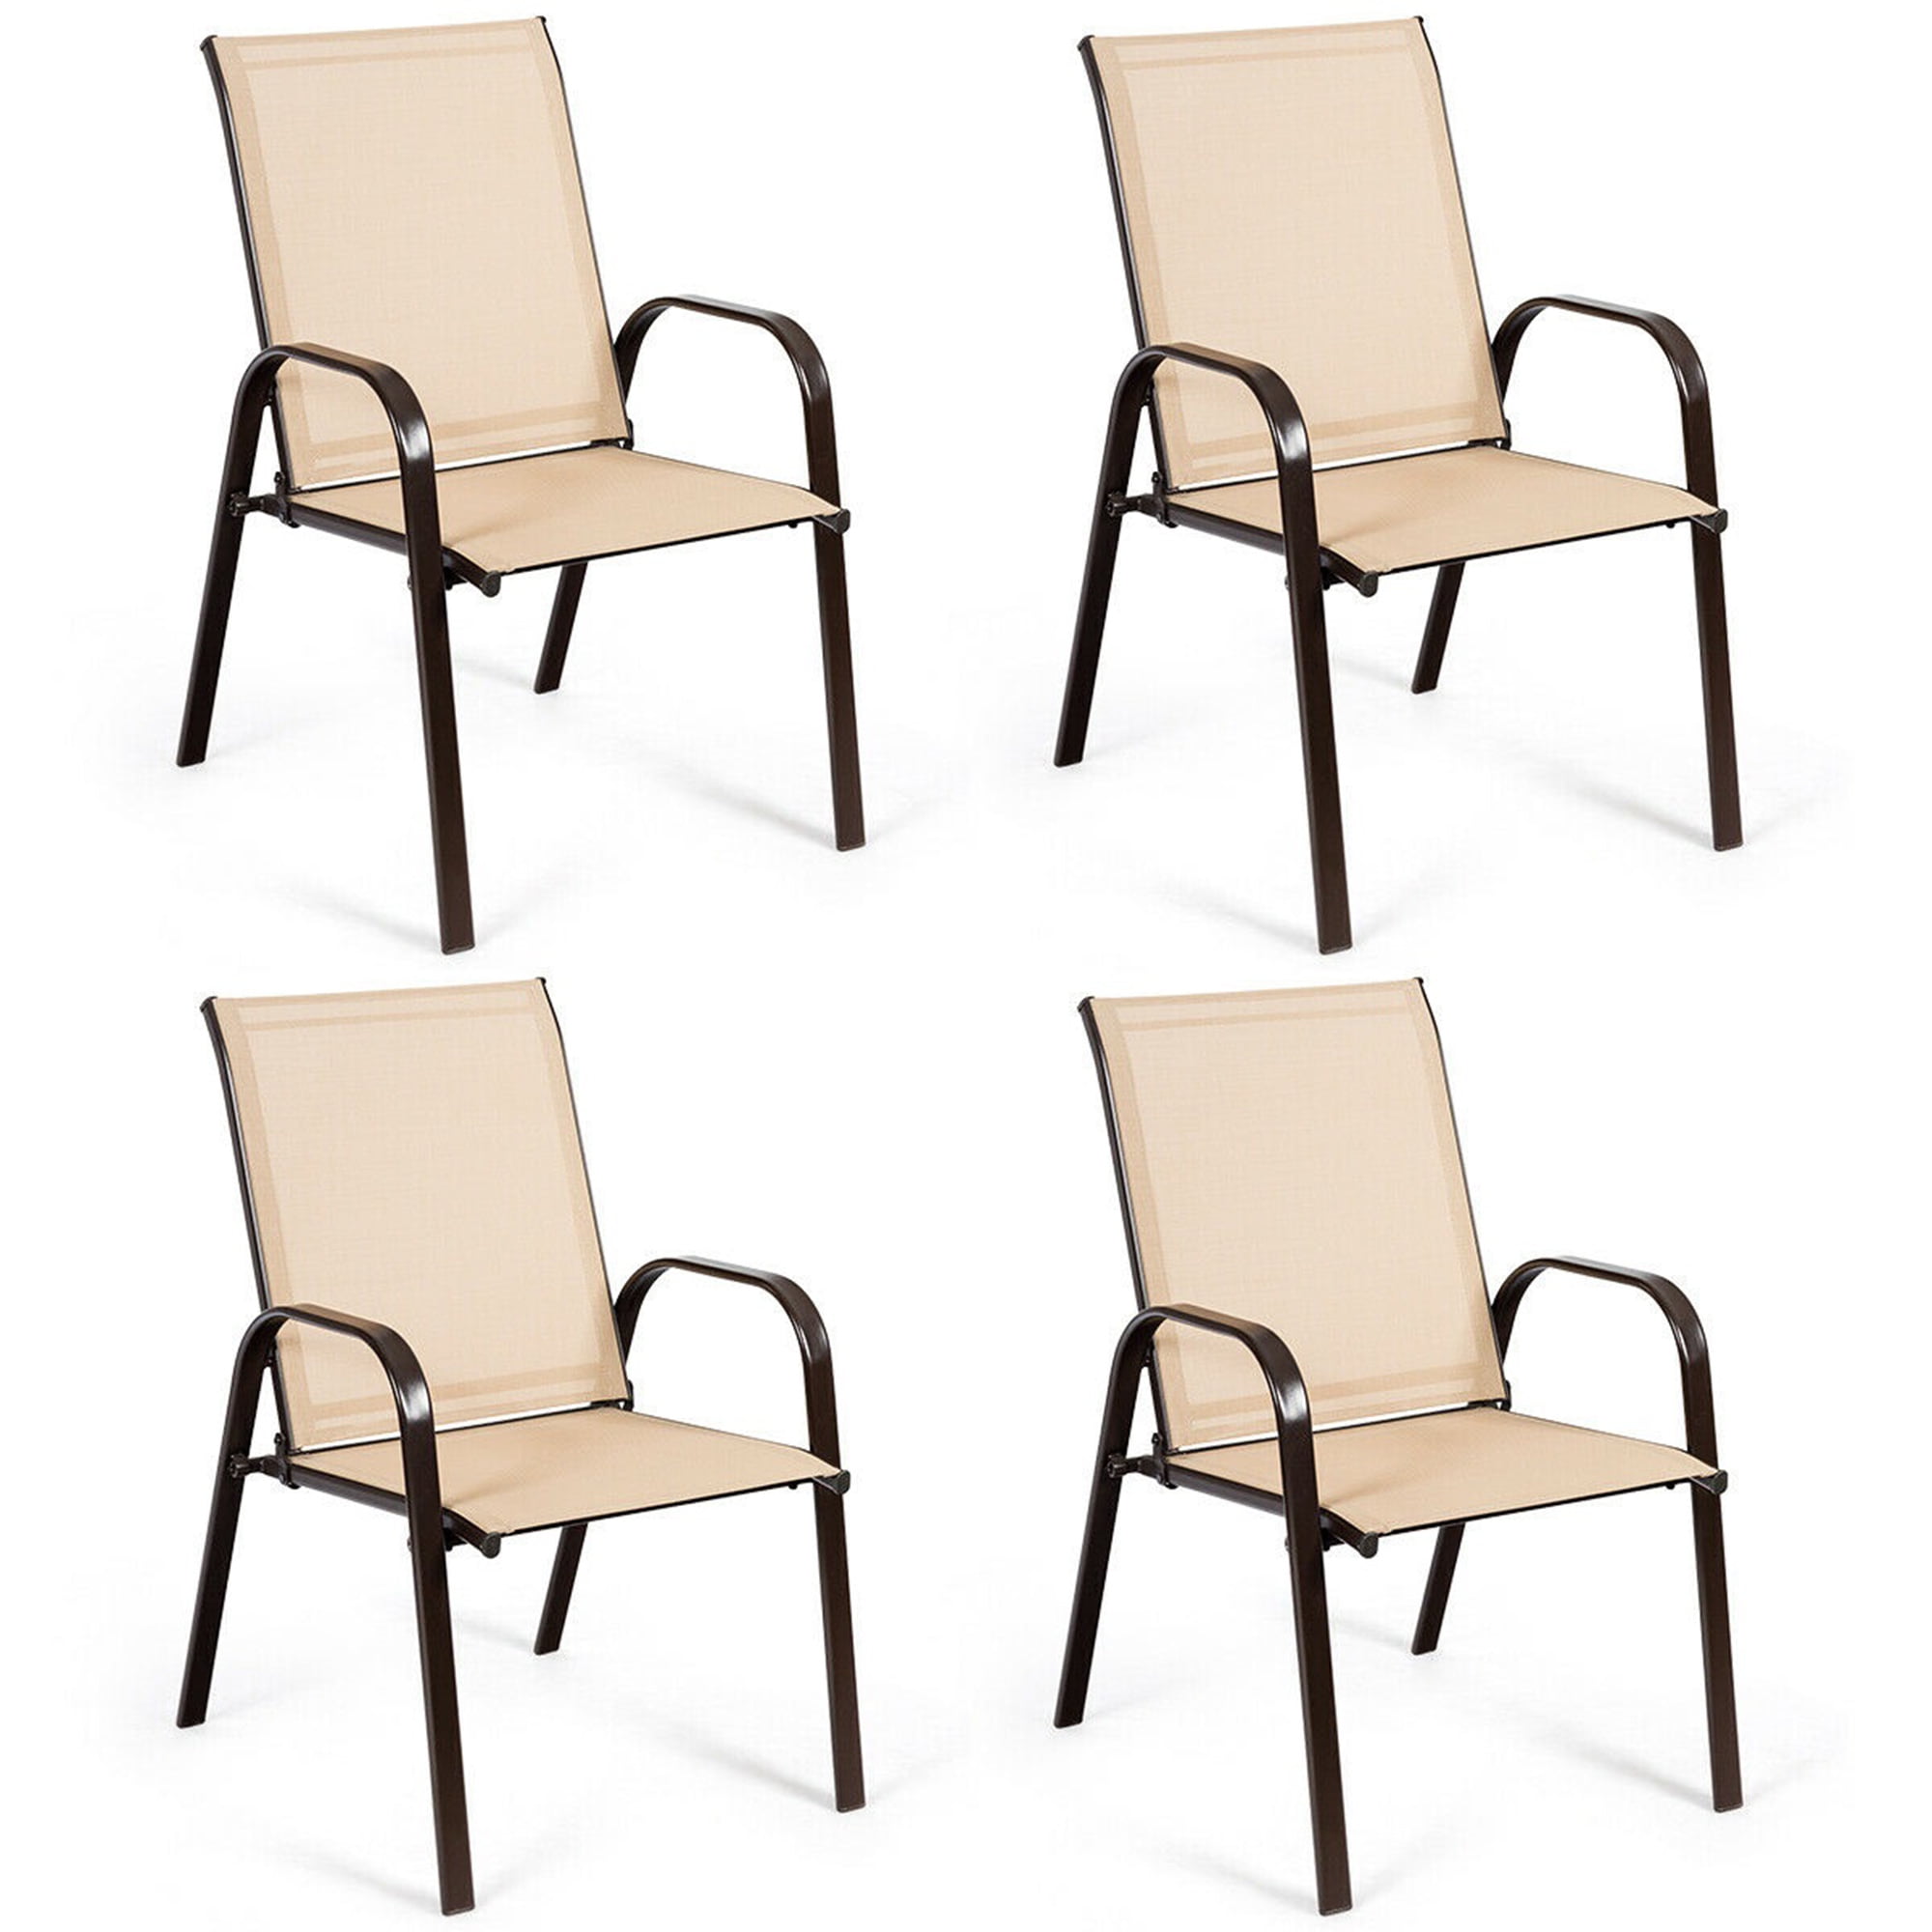 Gymax Outdoor Dining Chair - Steel - Set of 4 - Has Arms - Beige